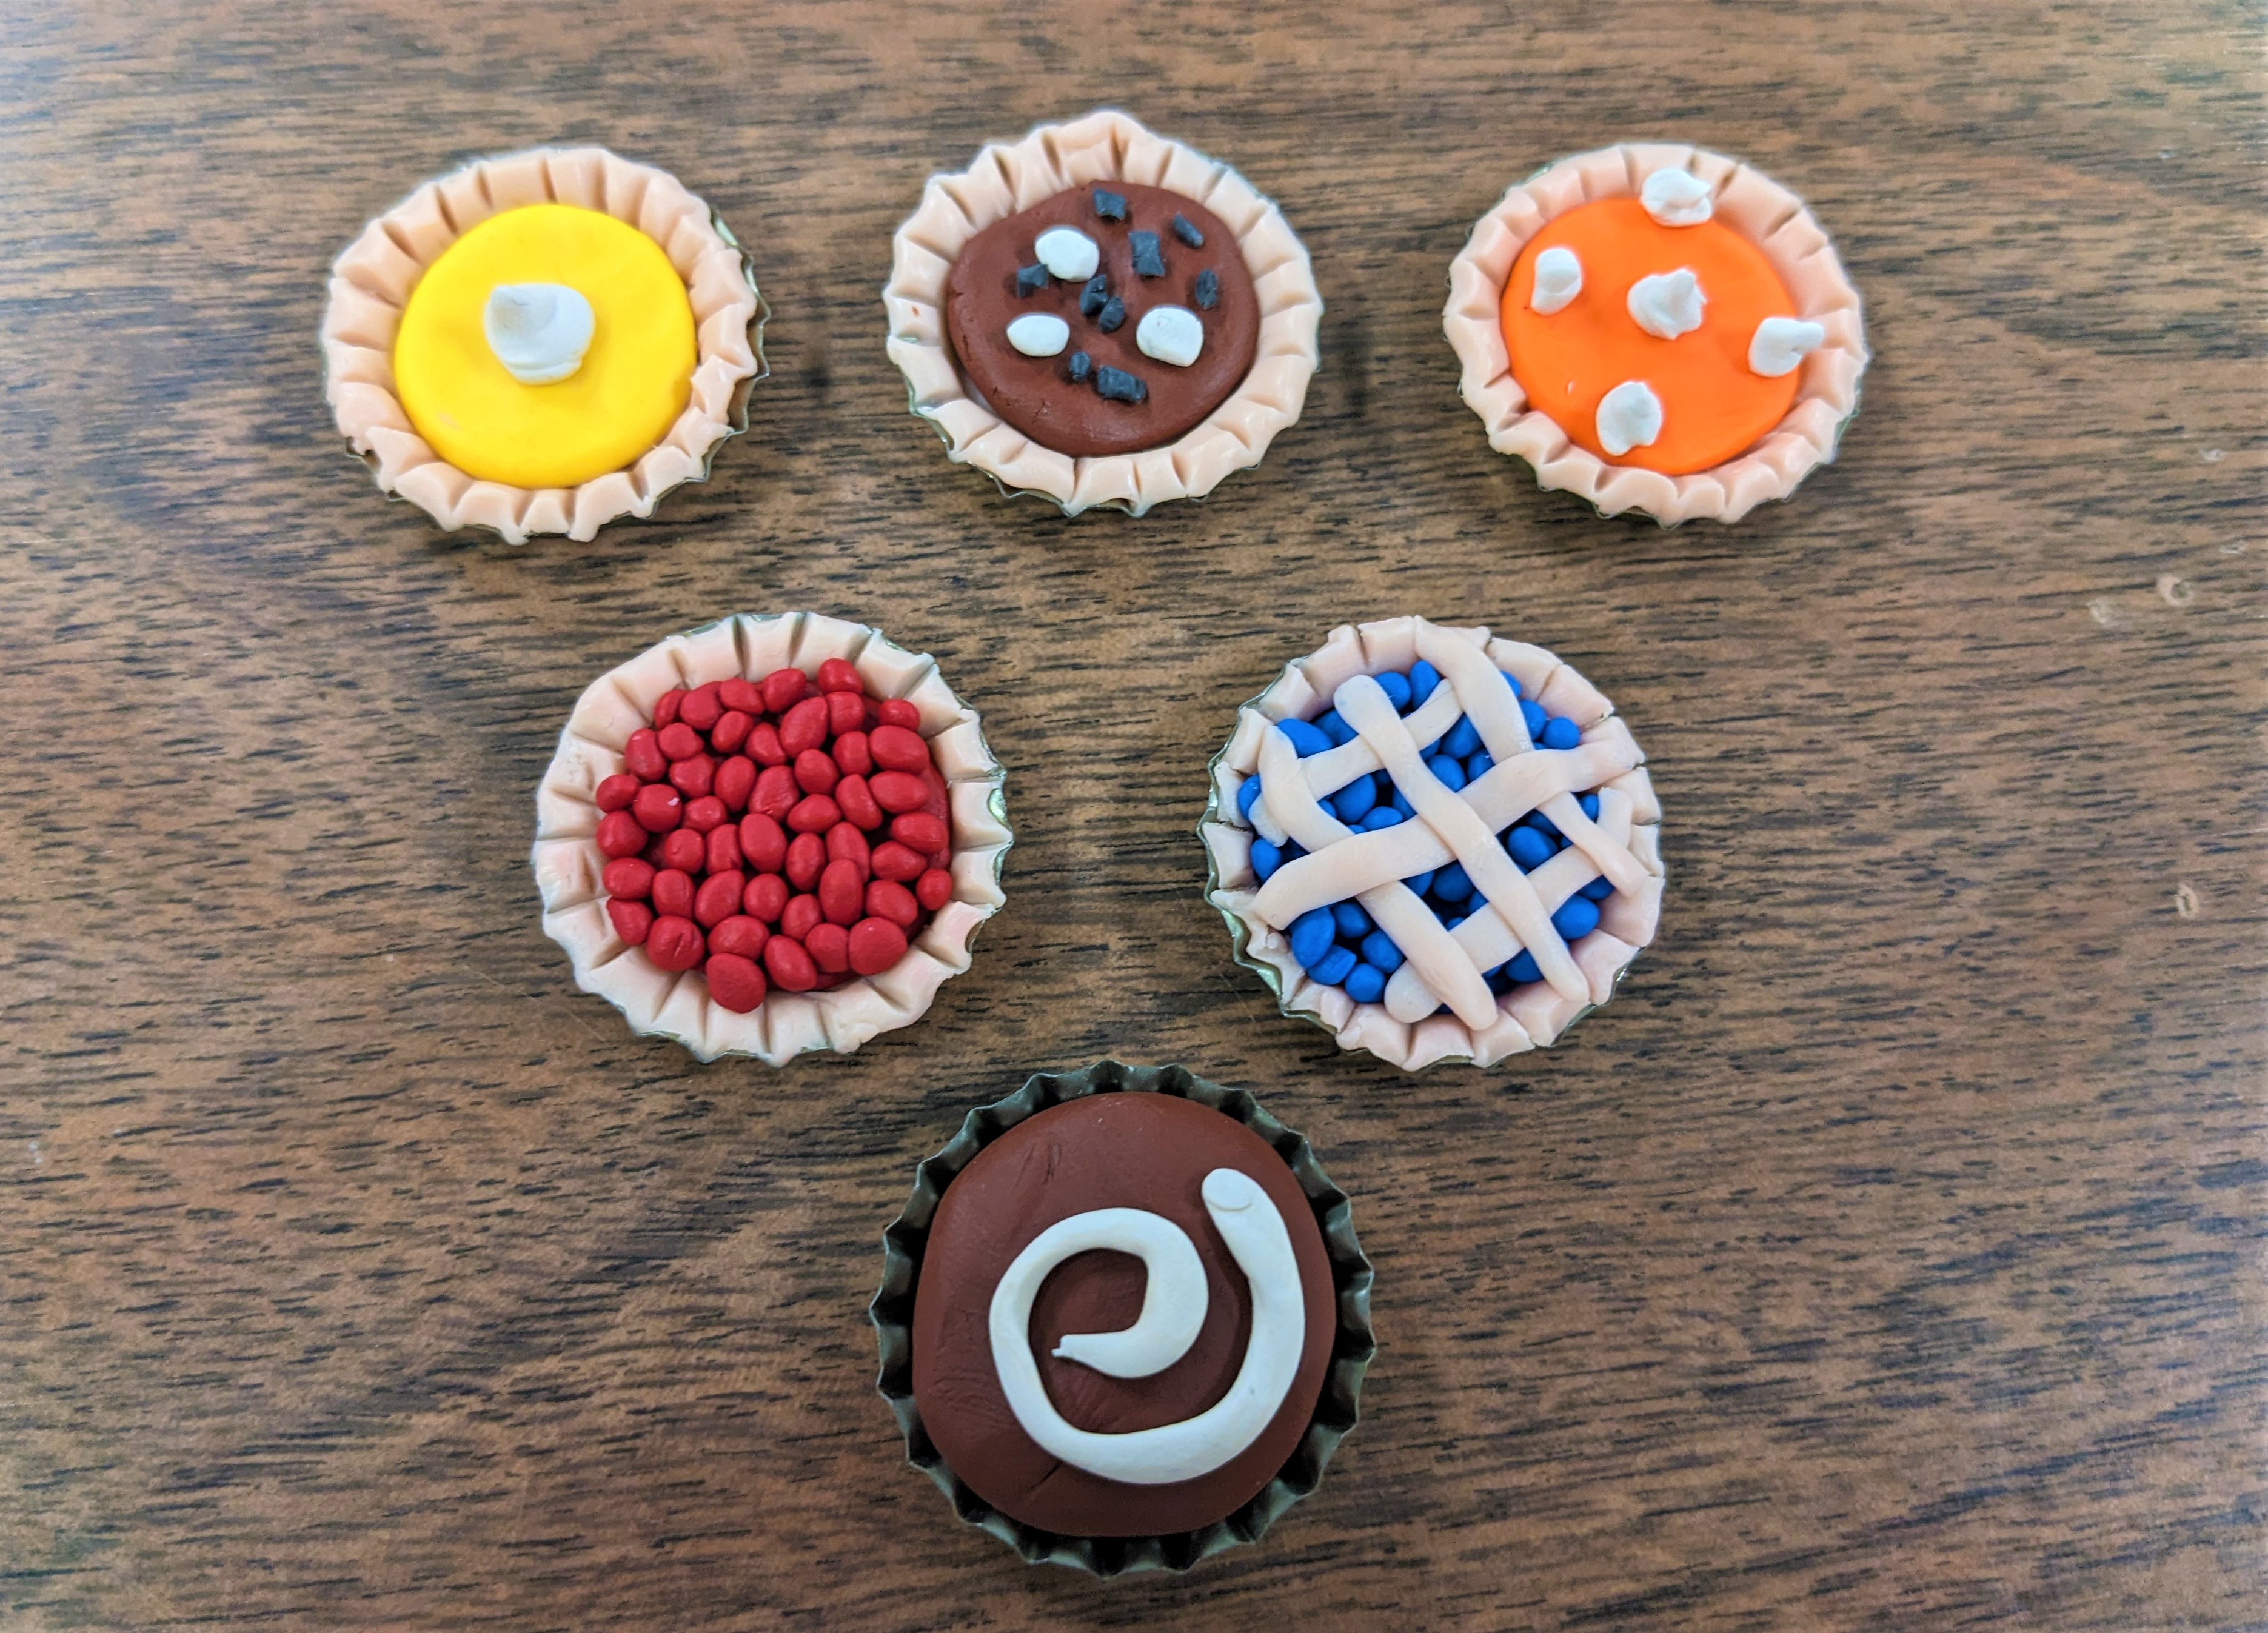 mini pies made from polymerclay